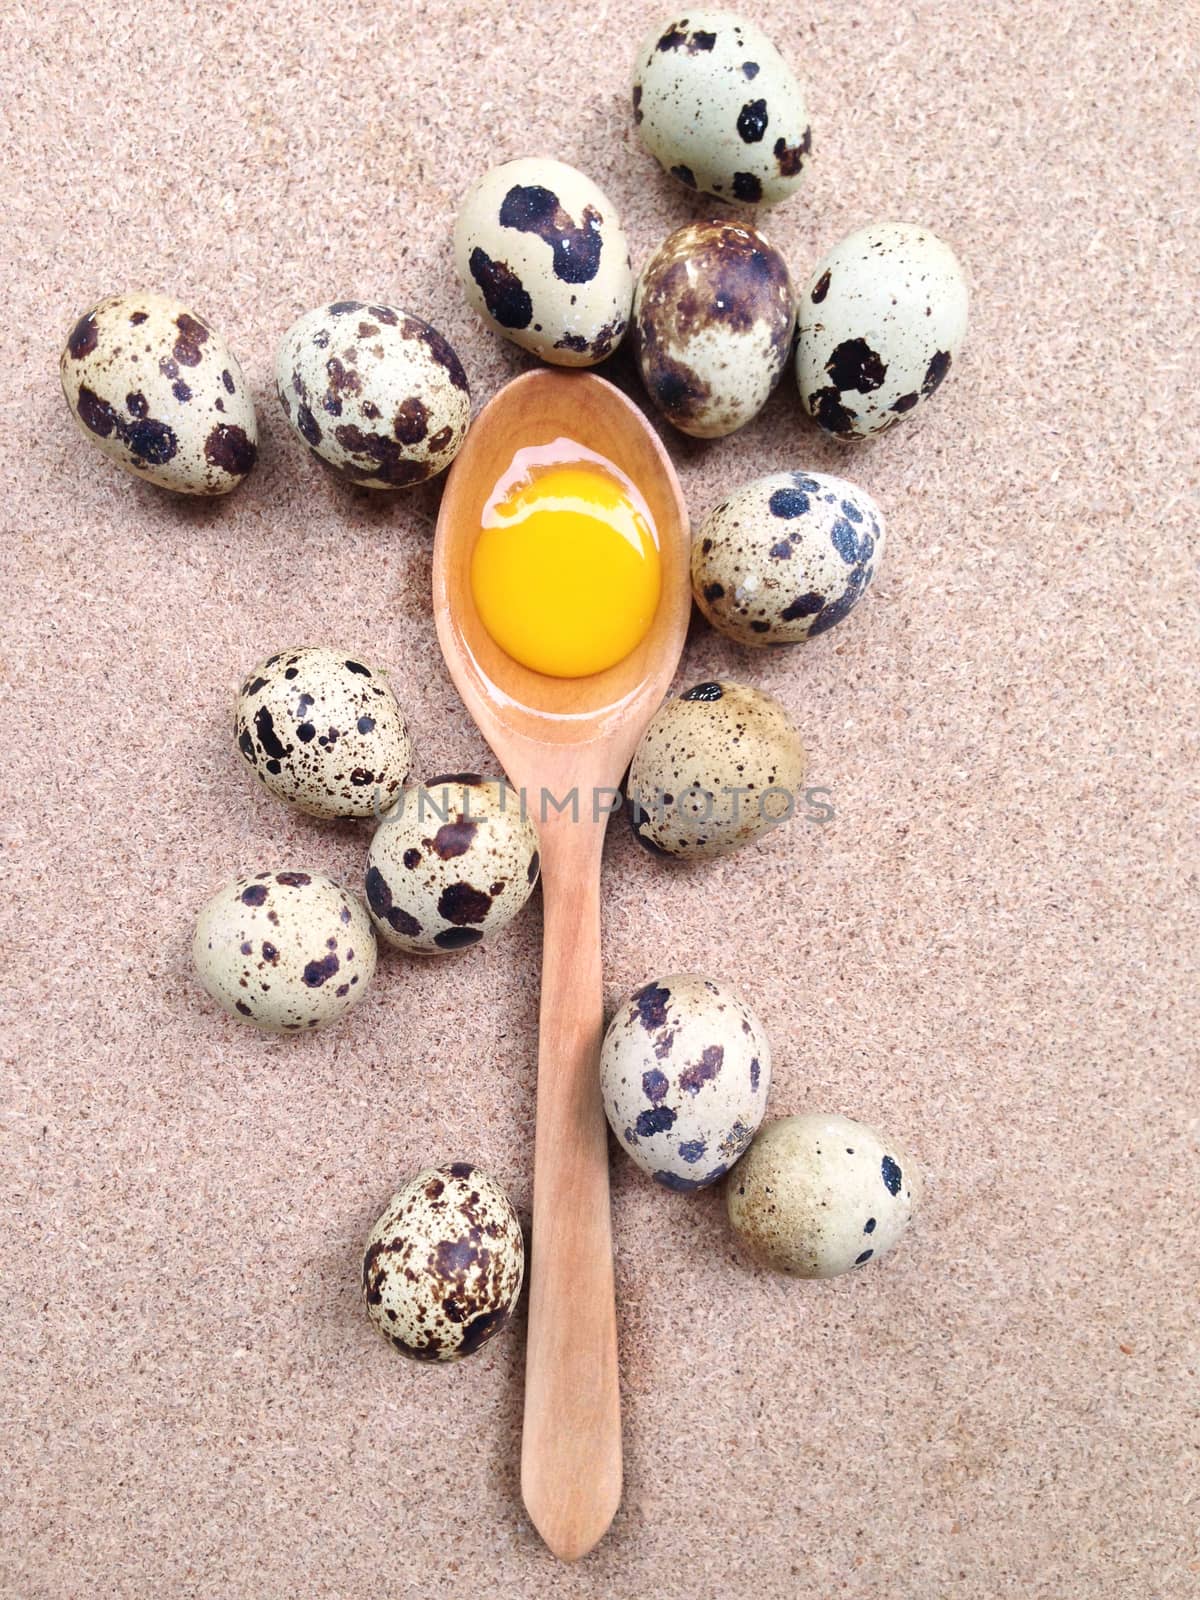 Quail eggs with yolk in wooden spoon on plywood by Bowonpat